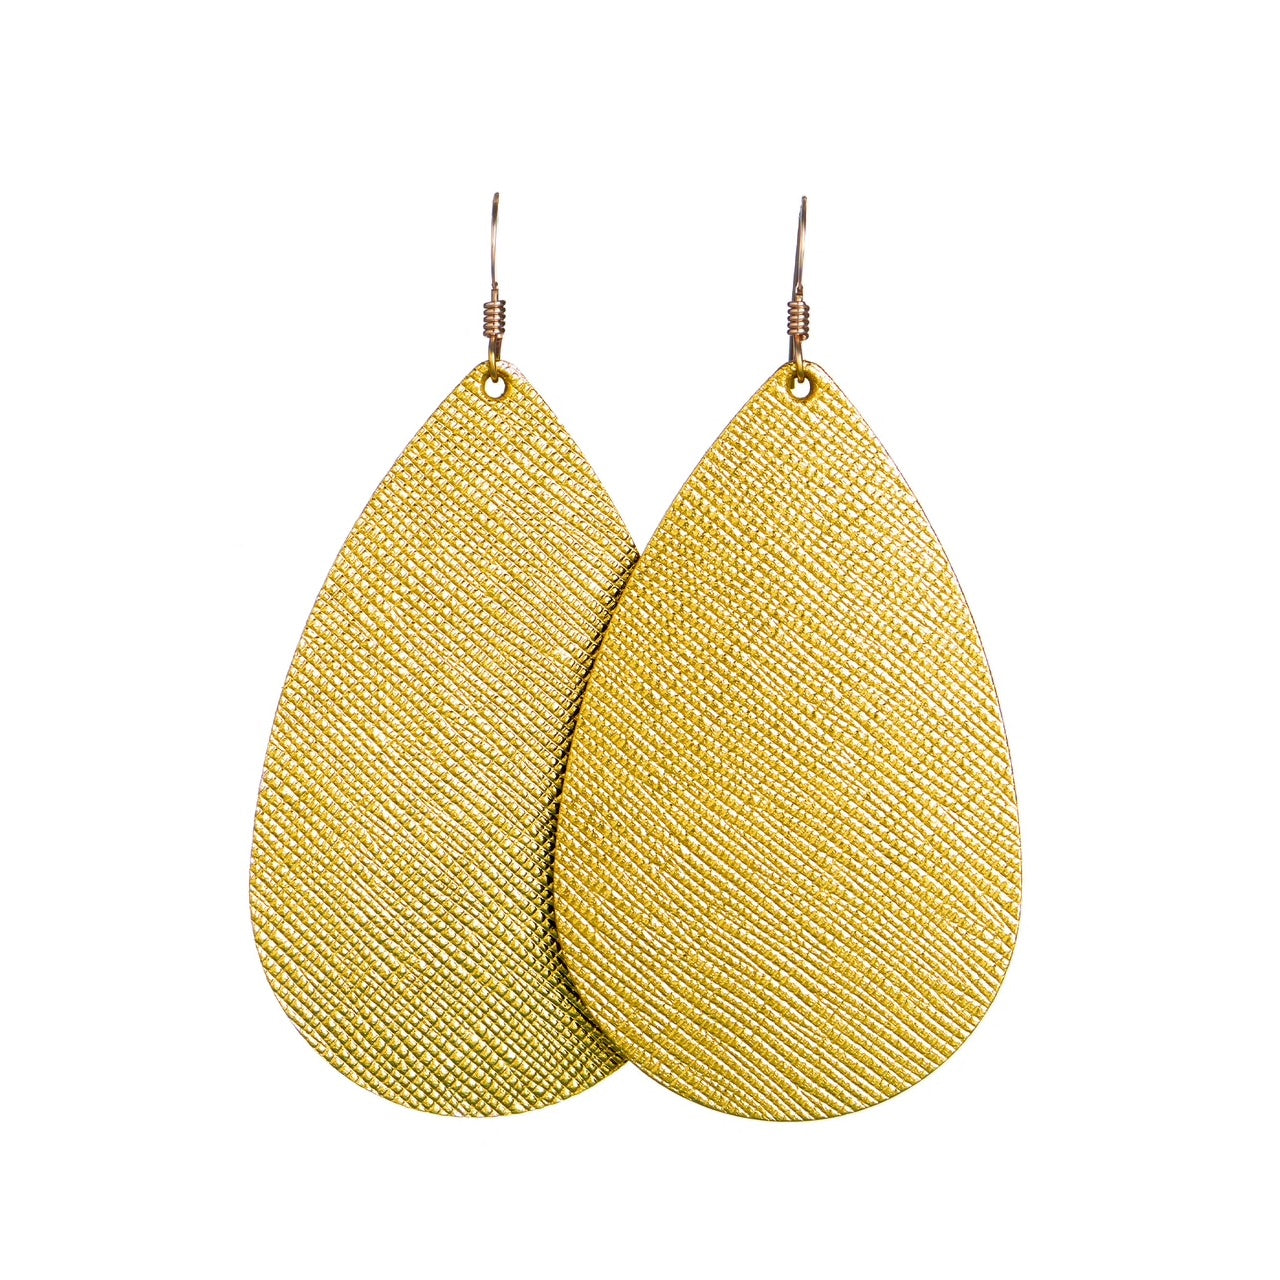 Nickel and Suede Gold Leaf Leather Earrings